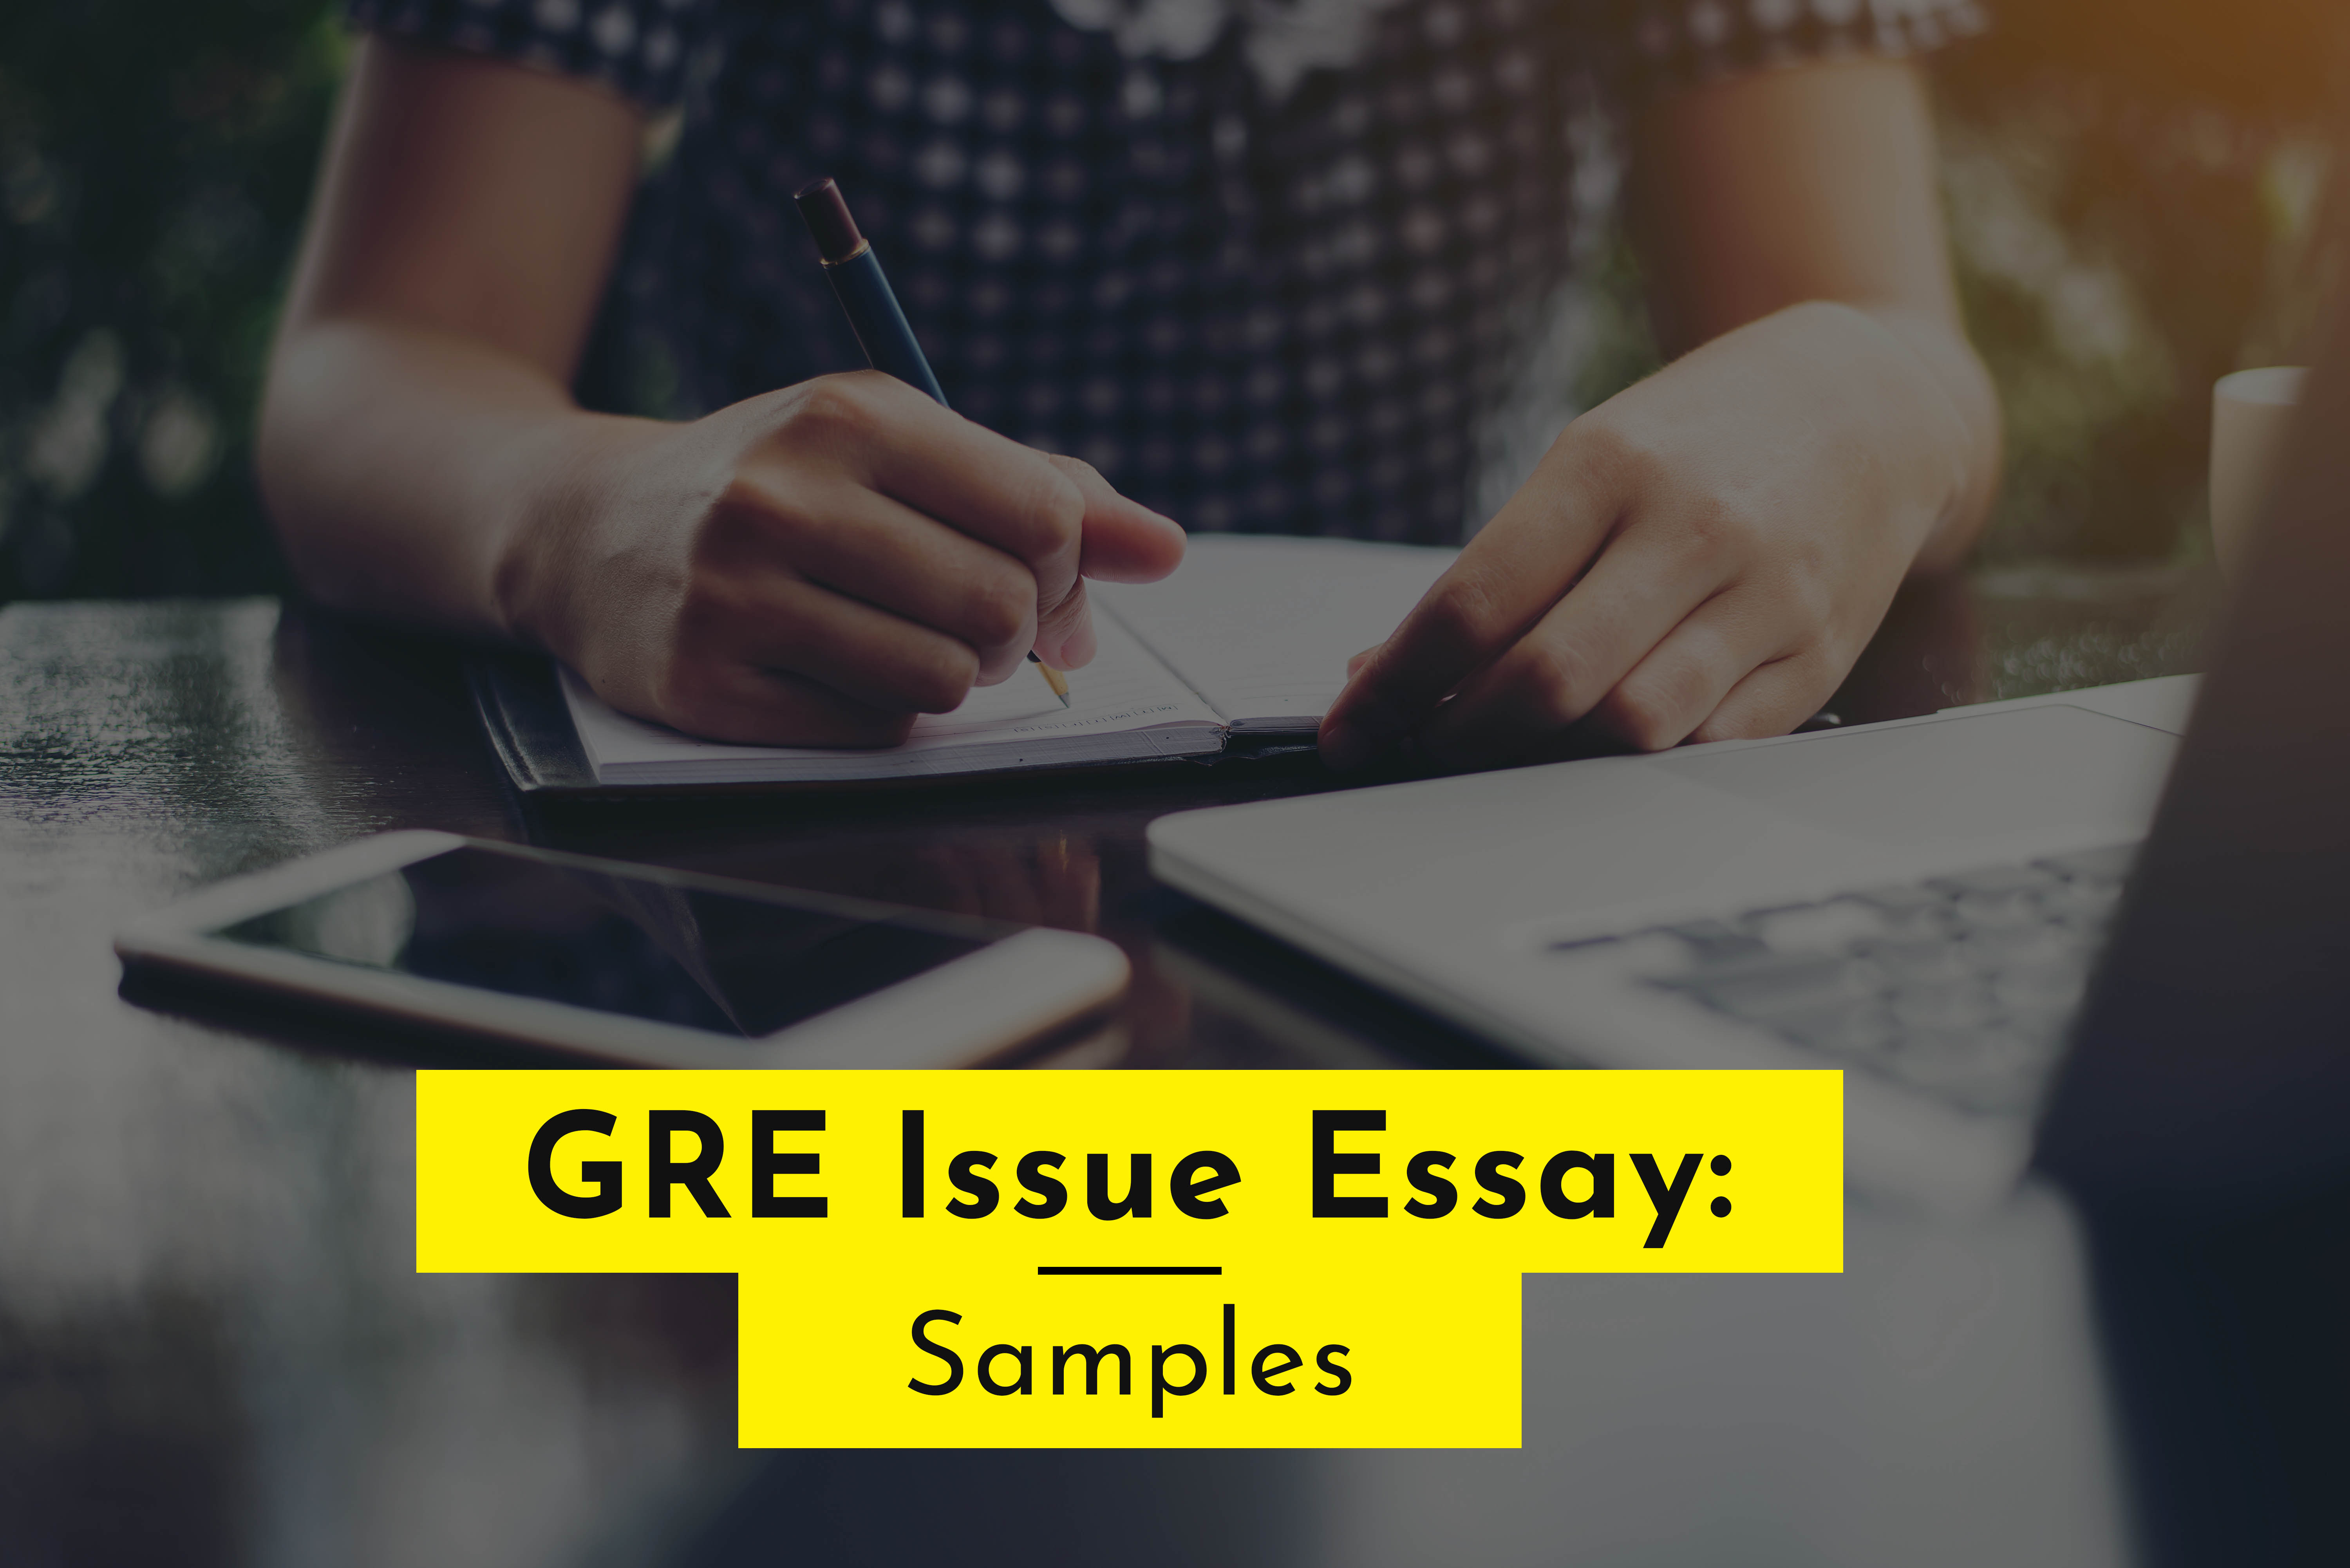 gre issue essay samples pdf